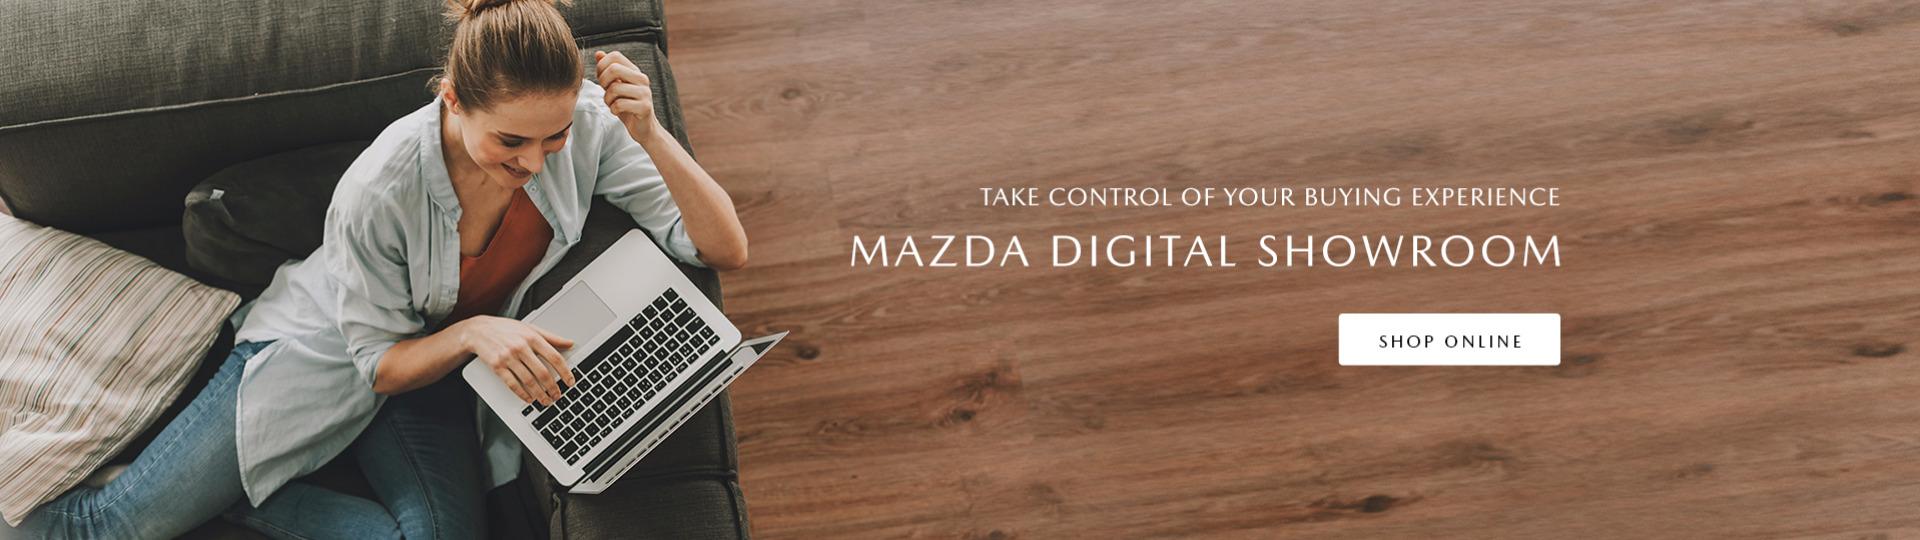 Take Control of your buying experience
Mazda Digital Showroom